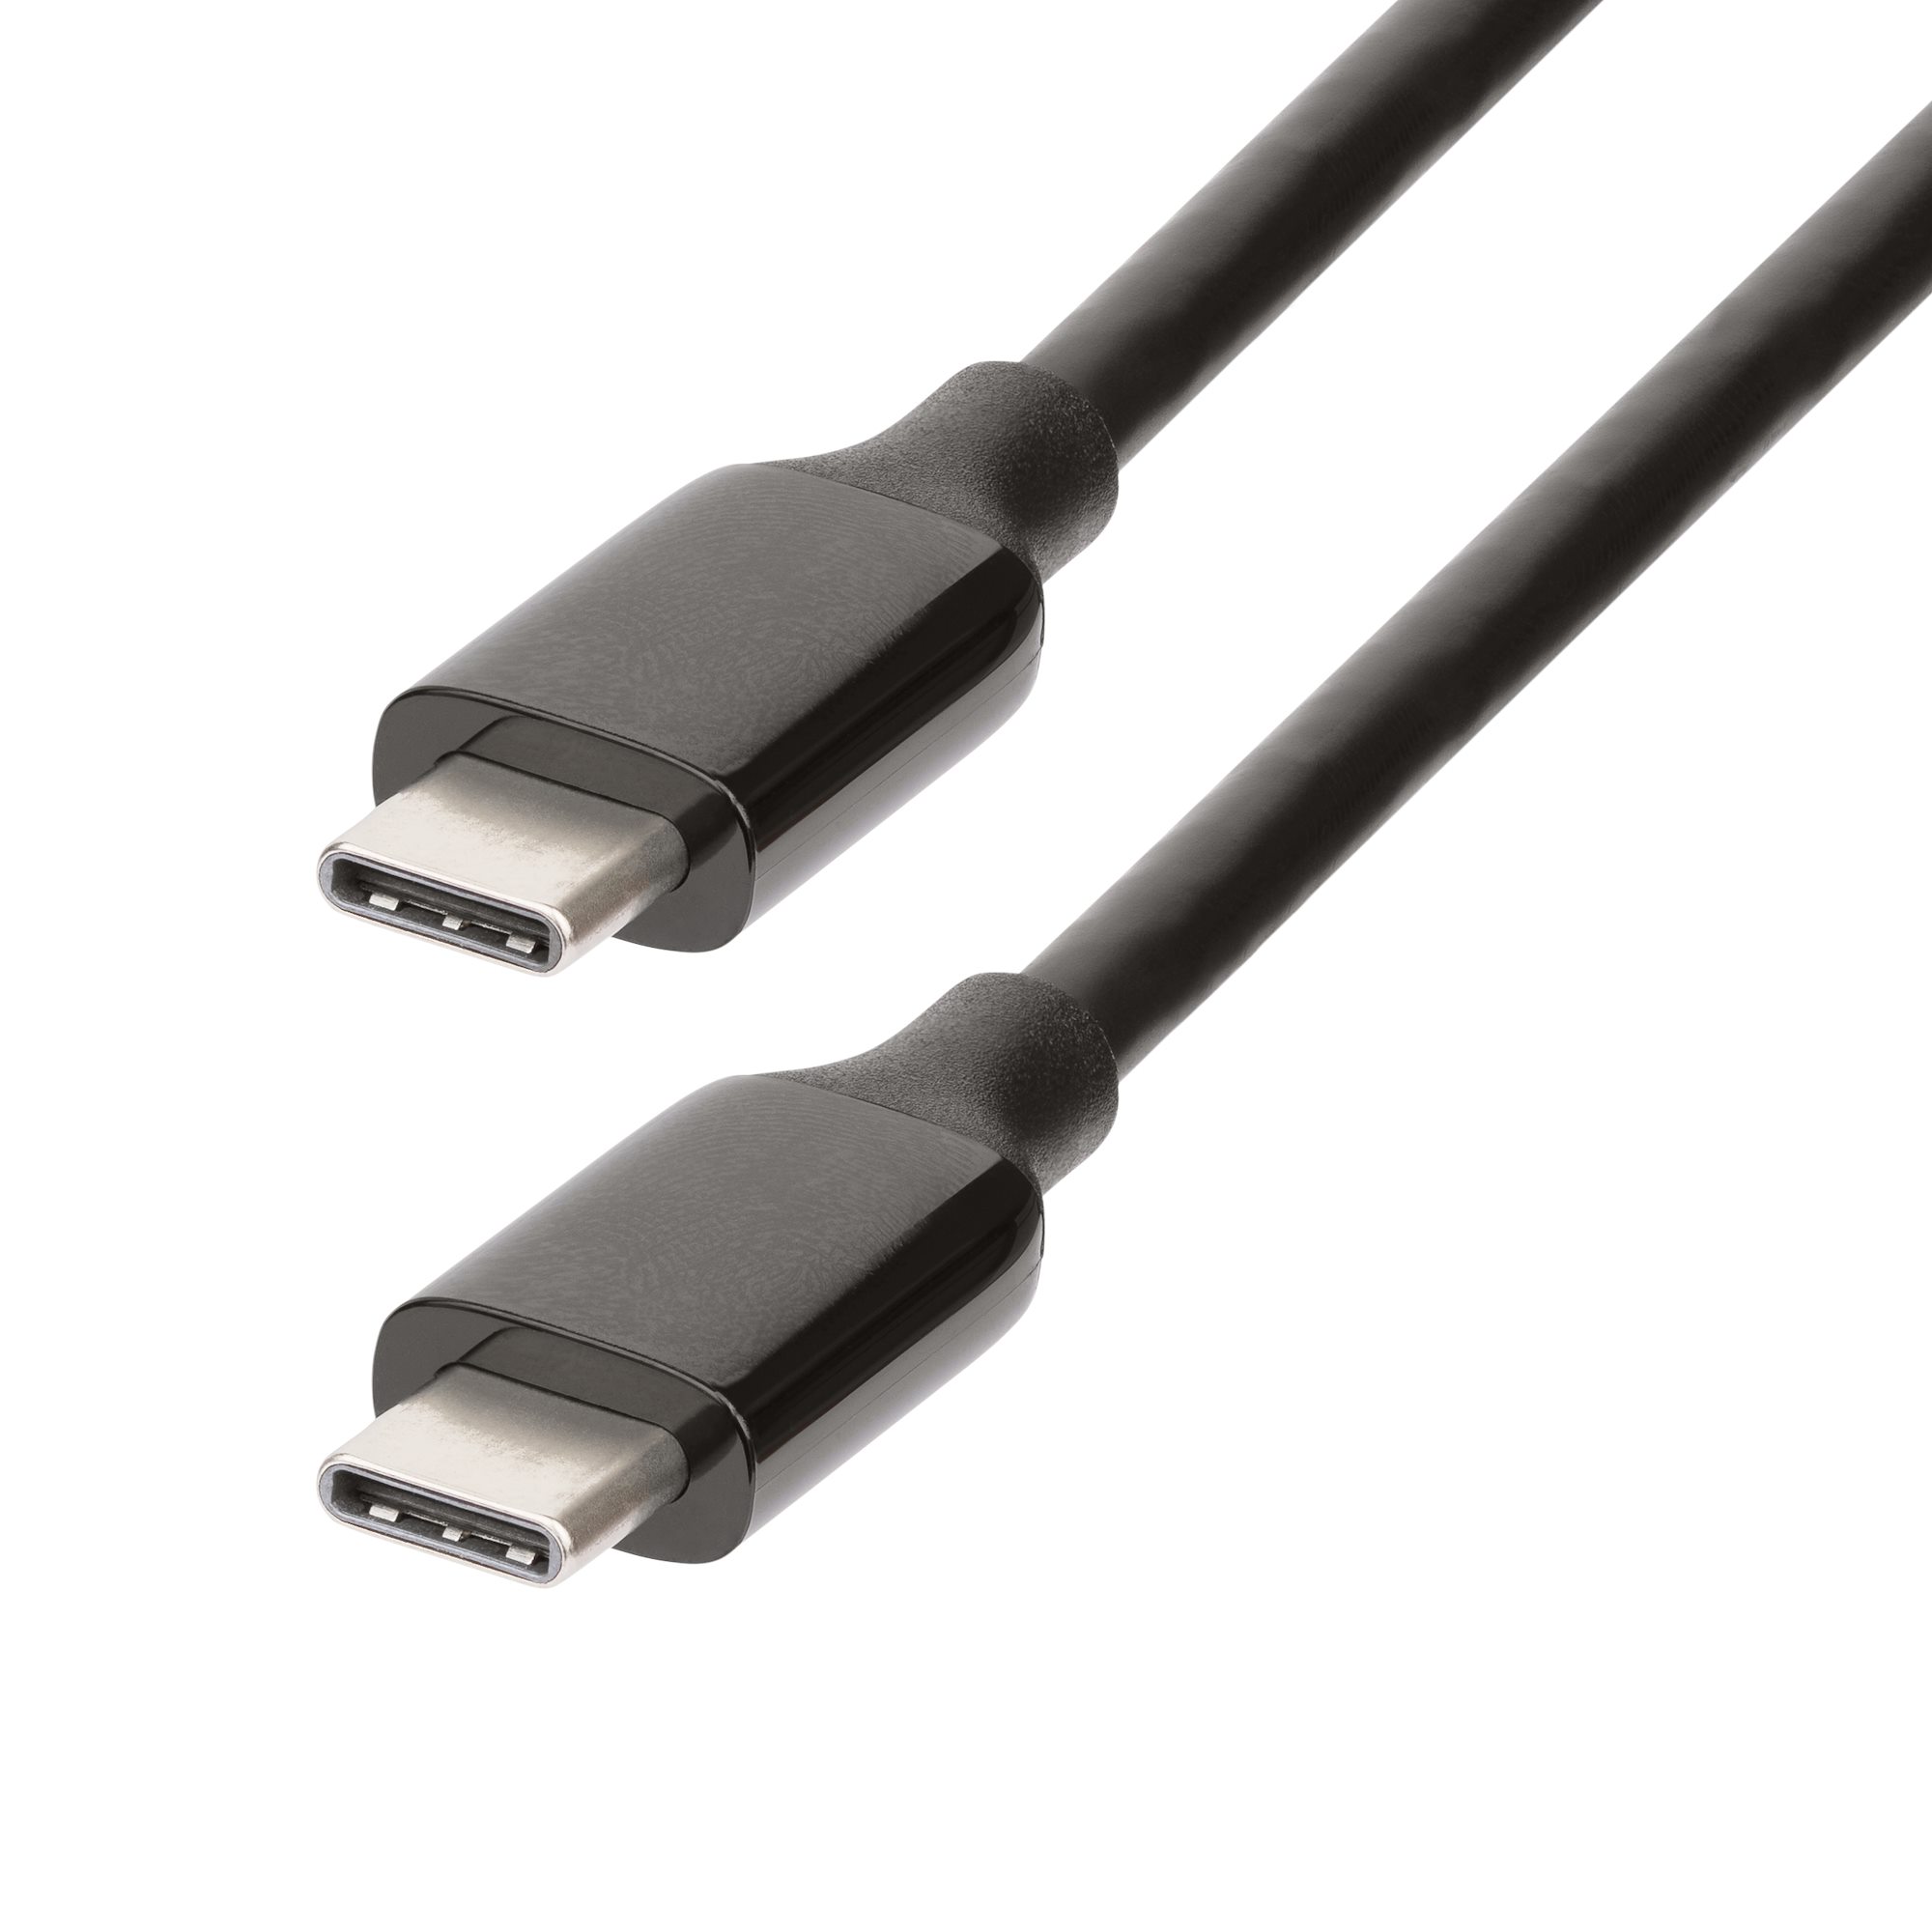 3m Active USB-C Cable, USB 3.2 10 Gbps - USB-C Cables